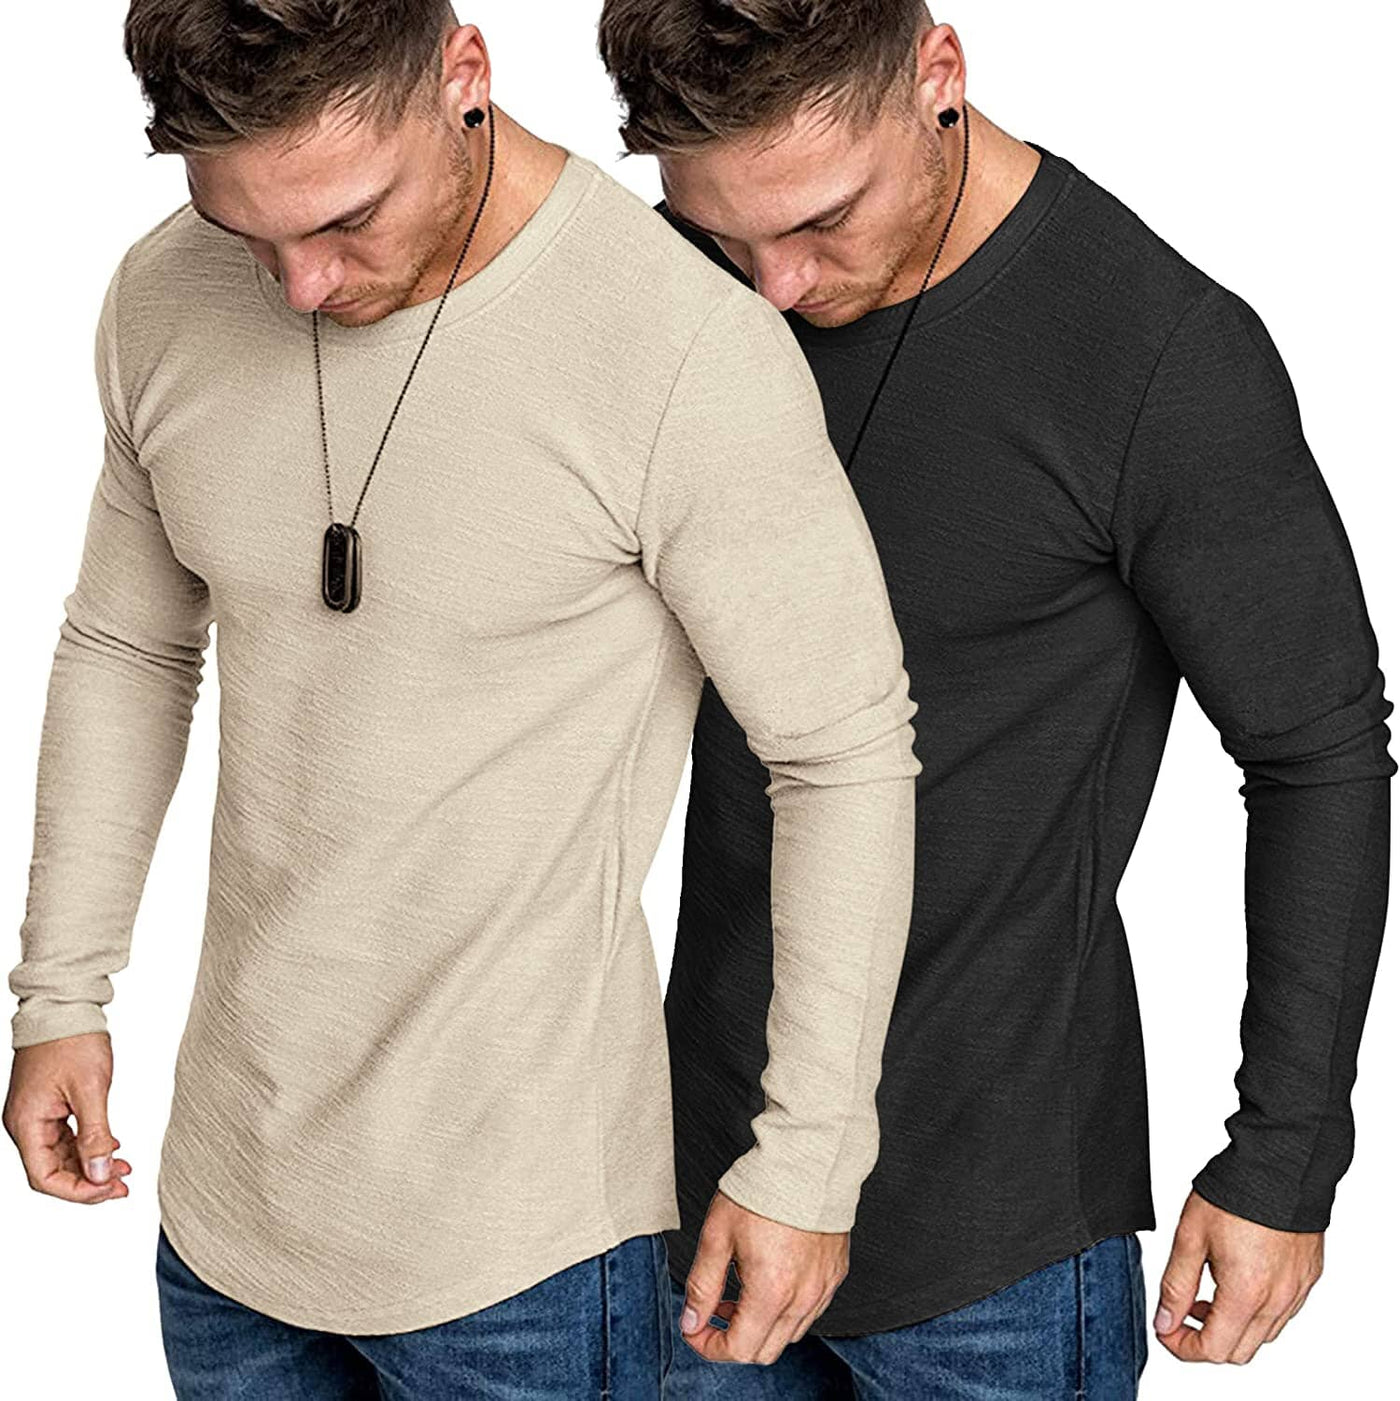 2-Pack Muscle Fitted Workout T-Shirt (US Only) T-Shirt COOFANDY Store Black/Khaki S 